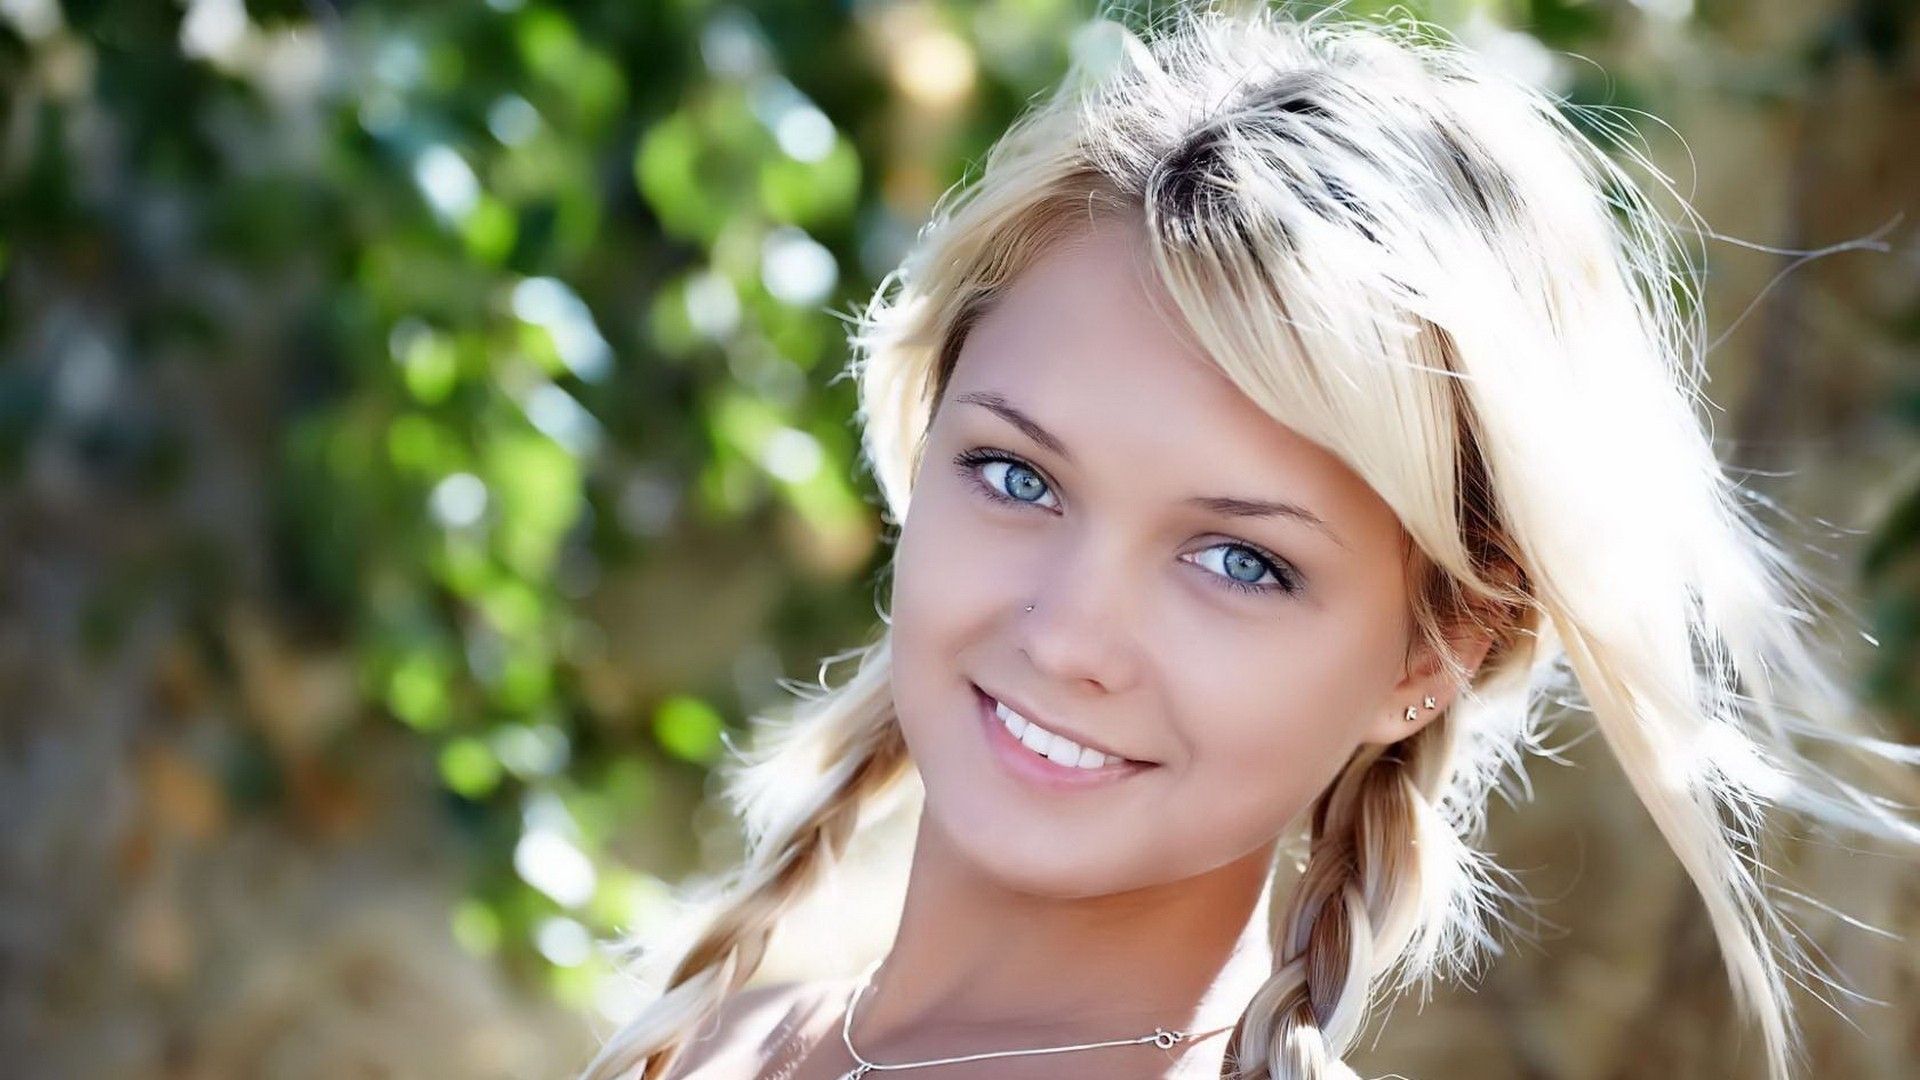 Best blue eyes girl wallpaper hd beautiful background images